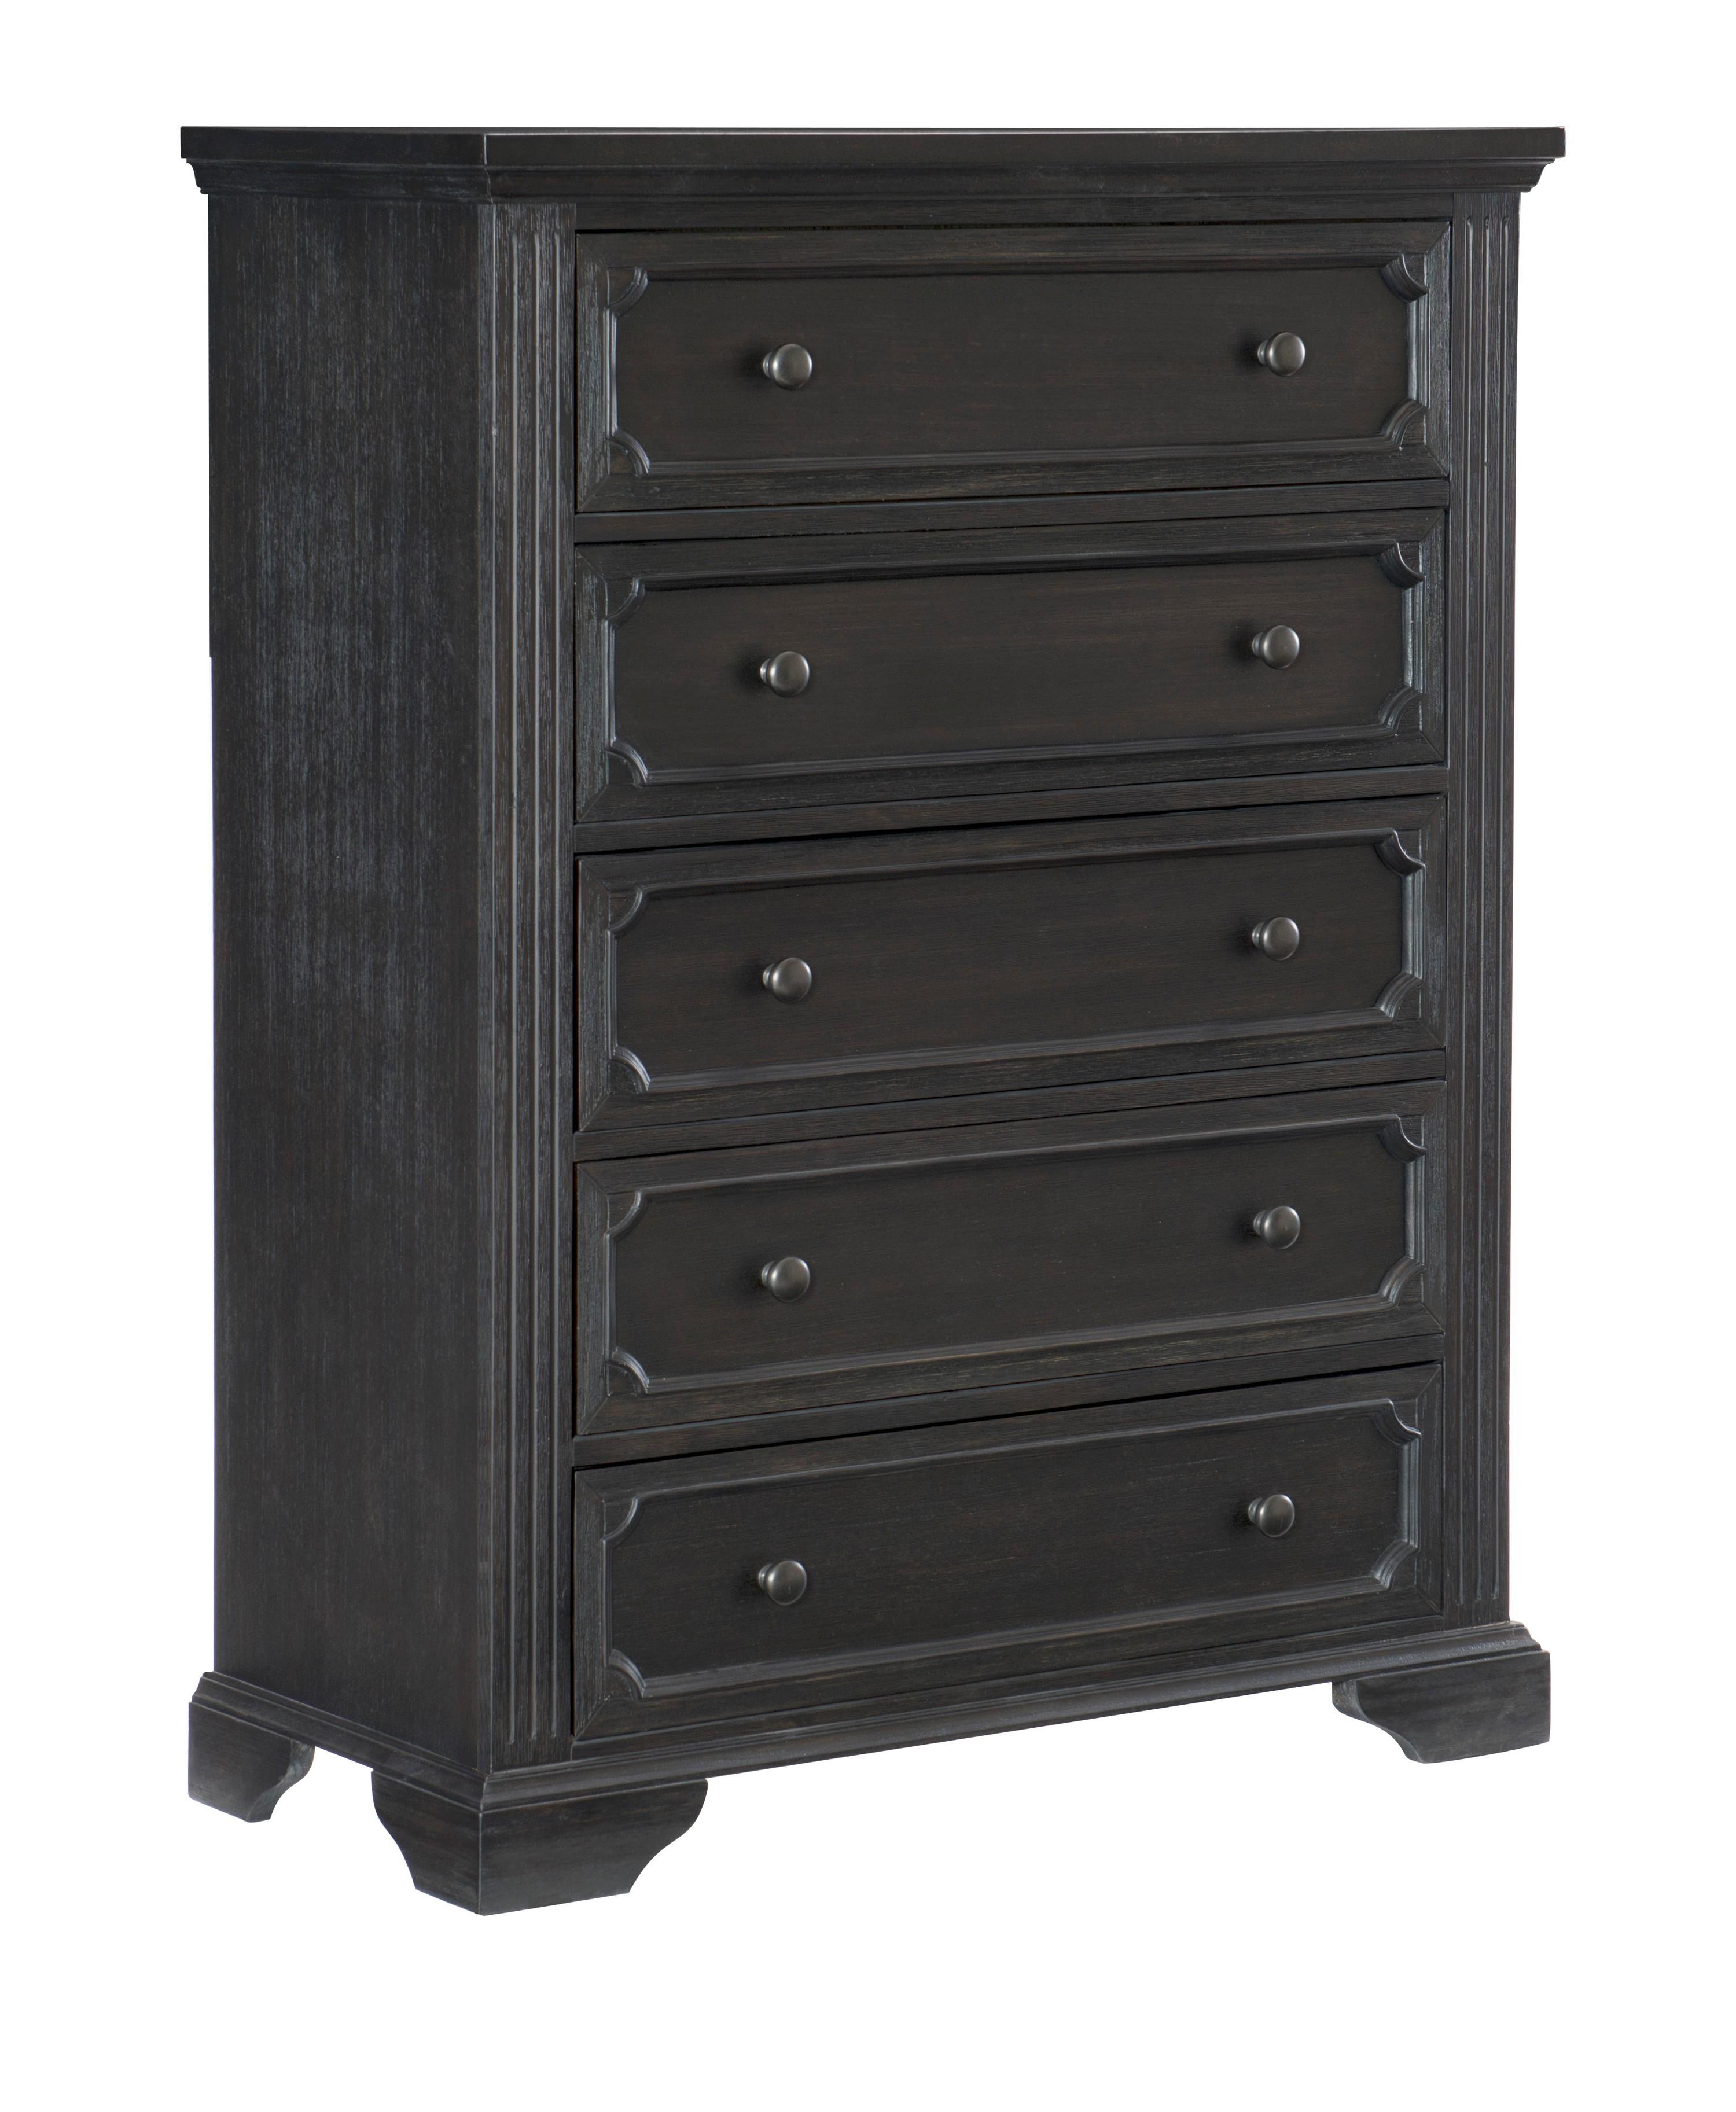 Rustic Chest 1647-9 Bolingbrook 1647-9 in Charcoal 